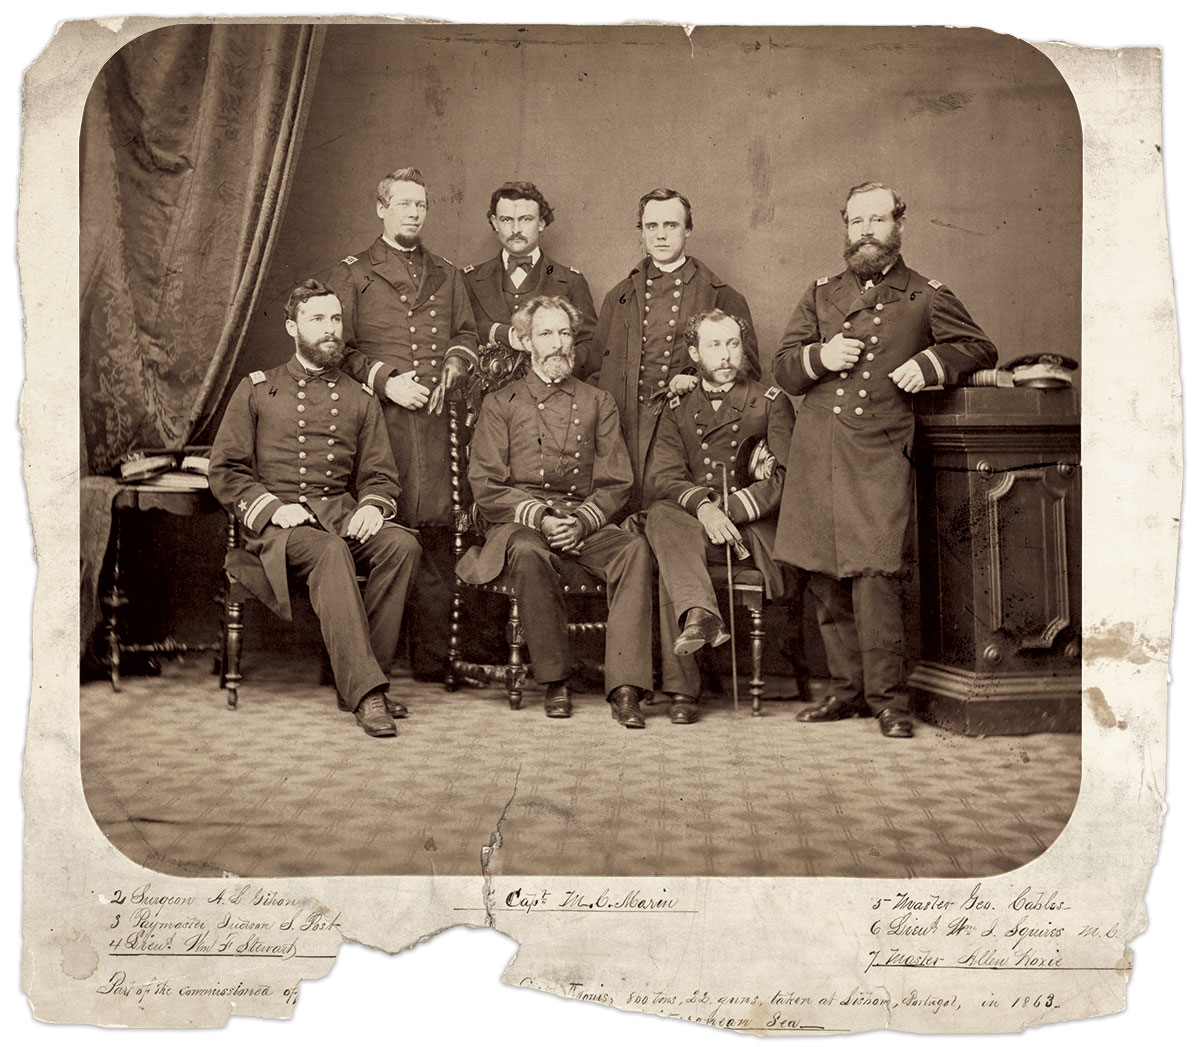 “Part of the commissioned officers of the U.S. Sloop of war Saint Louis, 800 tons, 22 guns, taken at Lisbon, Portugal, in 1863—while on a 3 years Cruise in the Mediterranean Sea” includes Surgeon Gihon, seated on the right with a cane. Sitting next to him is Capt. Marin and Lt. William F. Stewart. Standing, from left, are Acting Master Allen Hoxie, Paymaster Judson S. Post, Marine 1st Lt. William J. Squires, and Acting Master George Cables. The Picture Art Collection / Alamy Stock Photo.